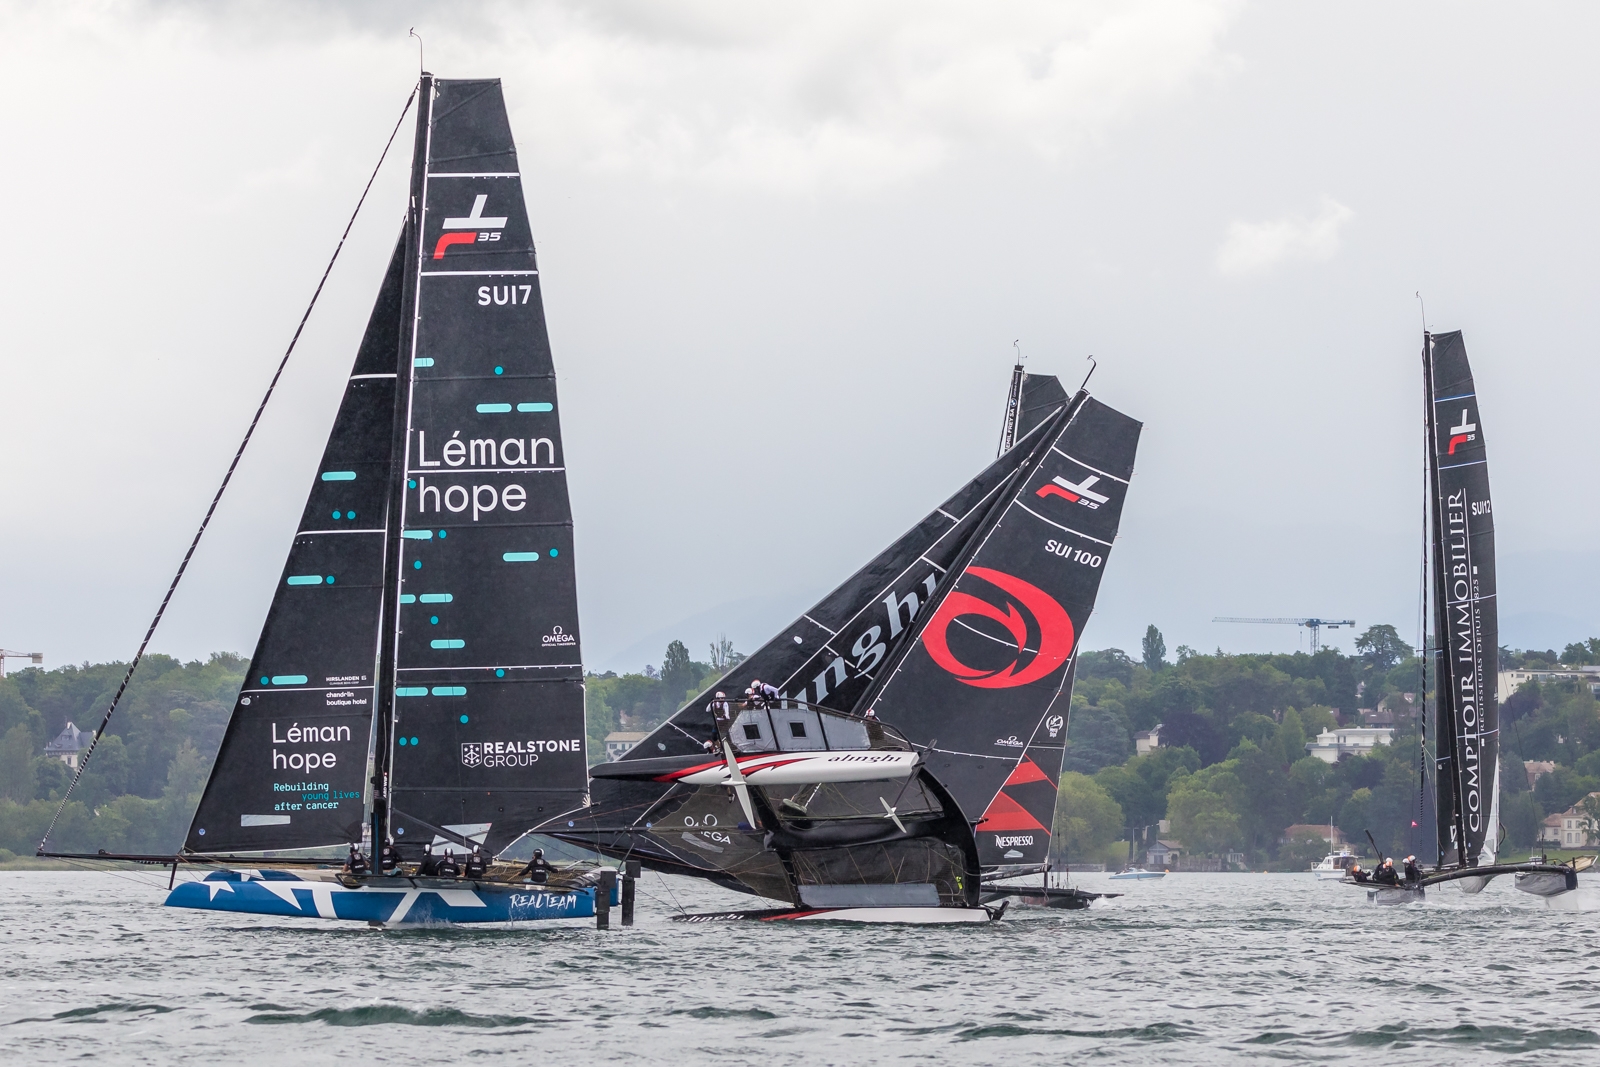  TF35Catamaran  TF35Trophy  Act 3  Mies  Victoire pour RealTeam